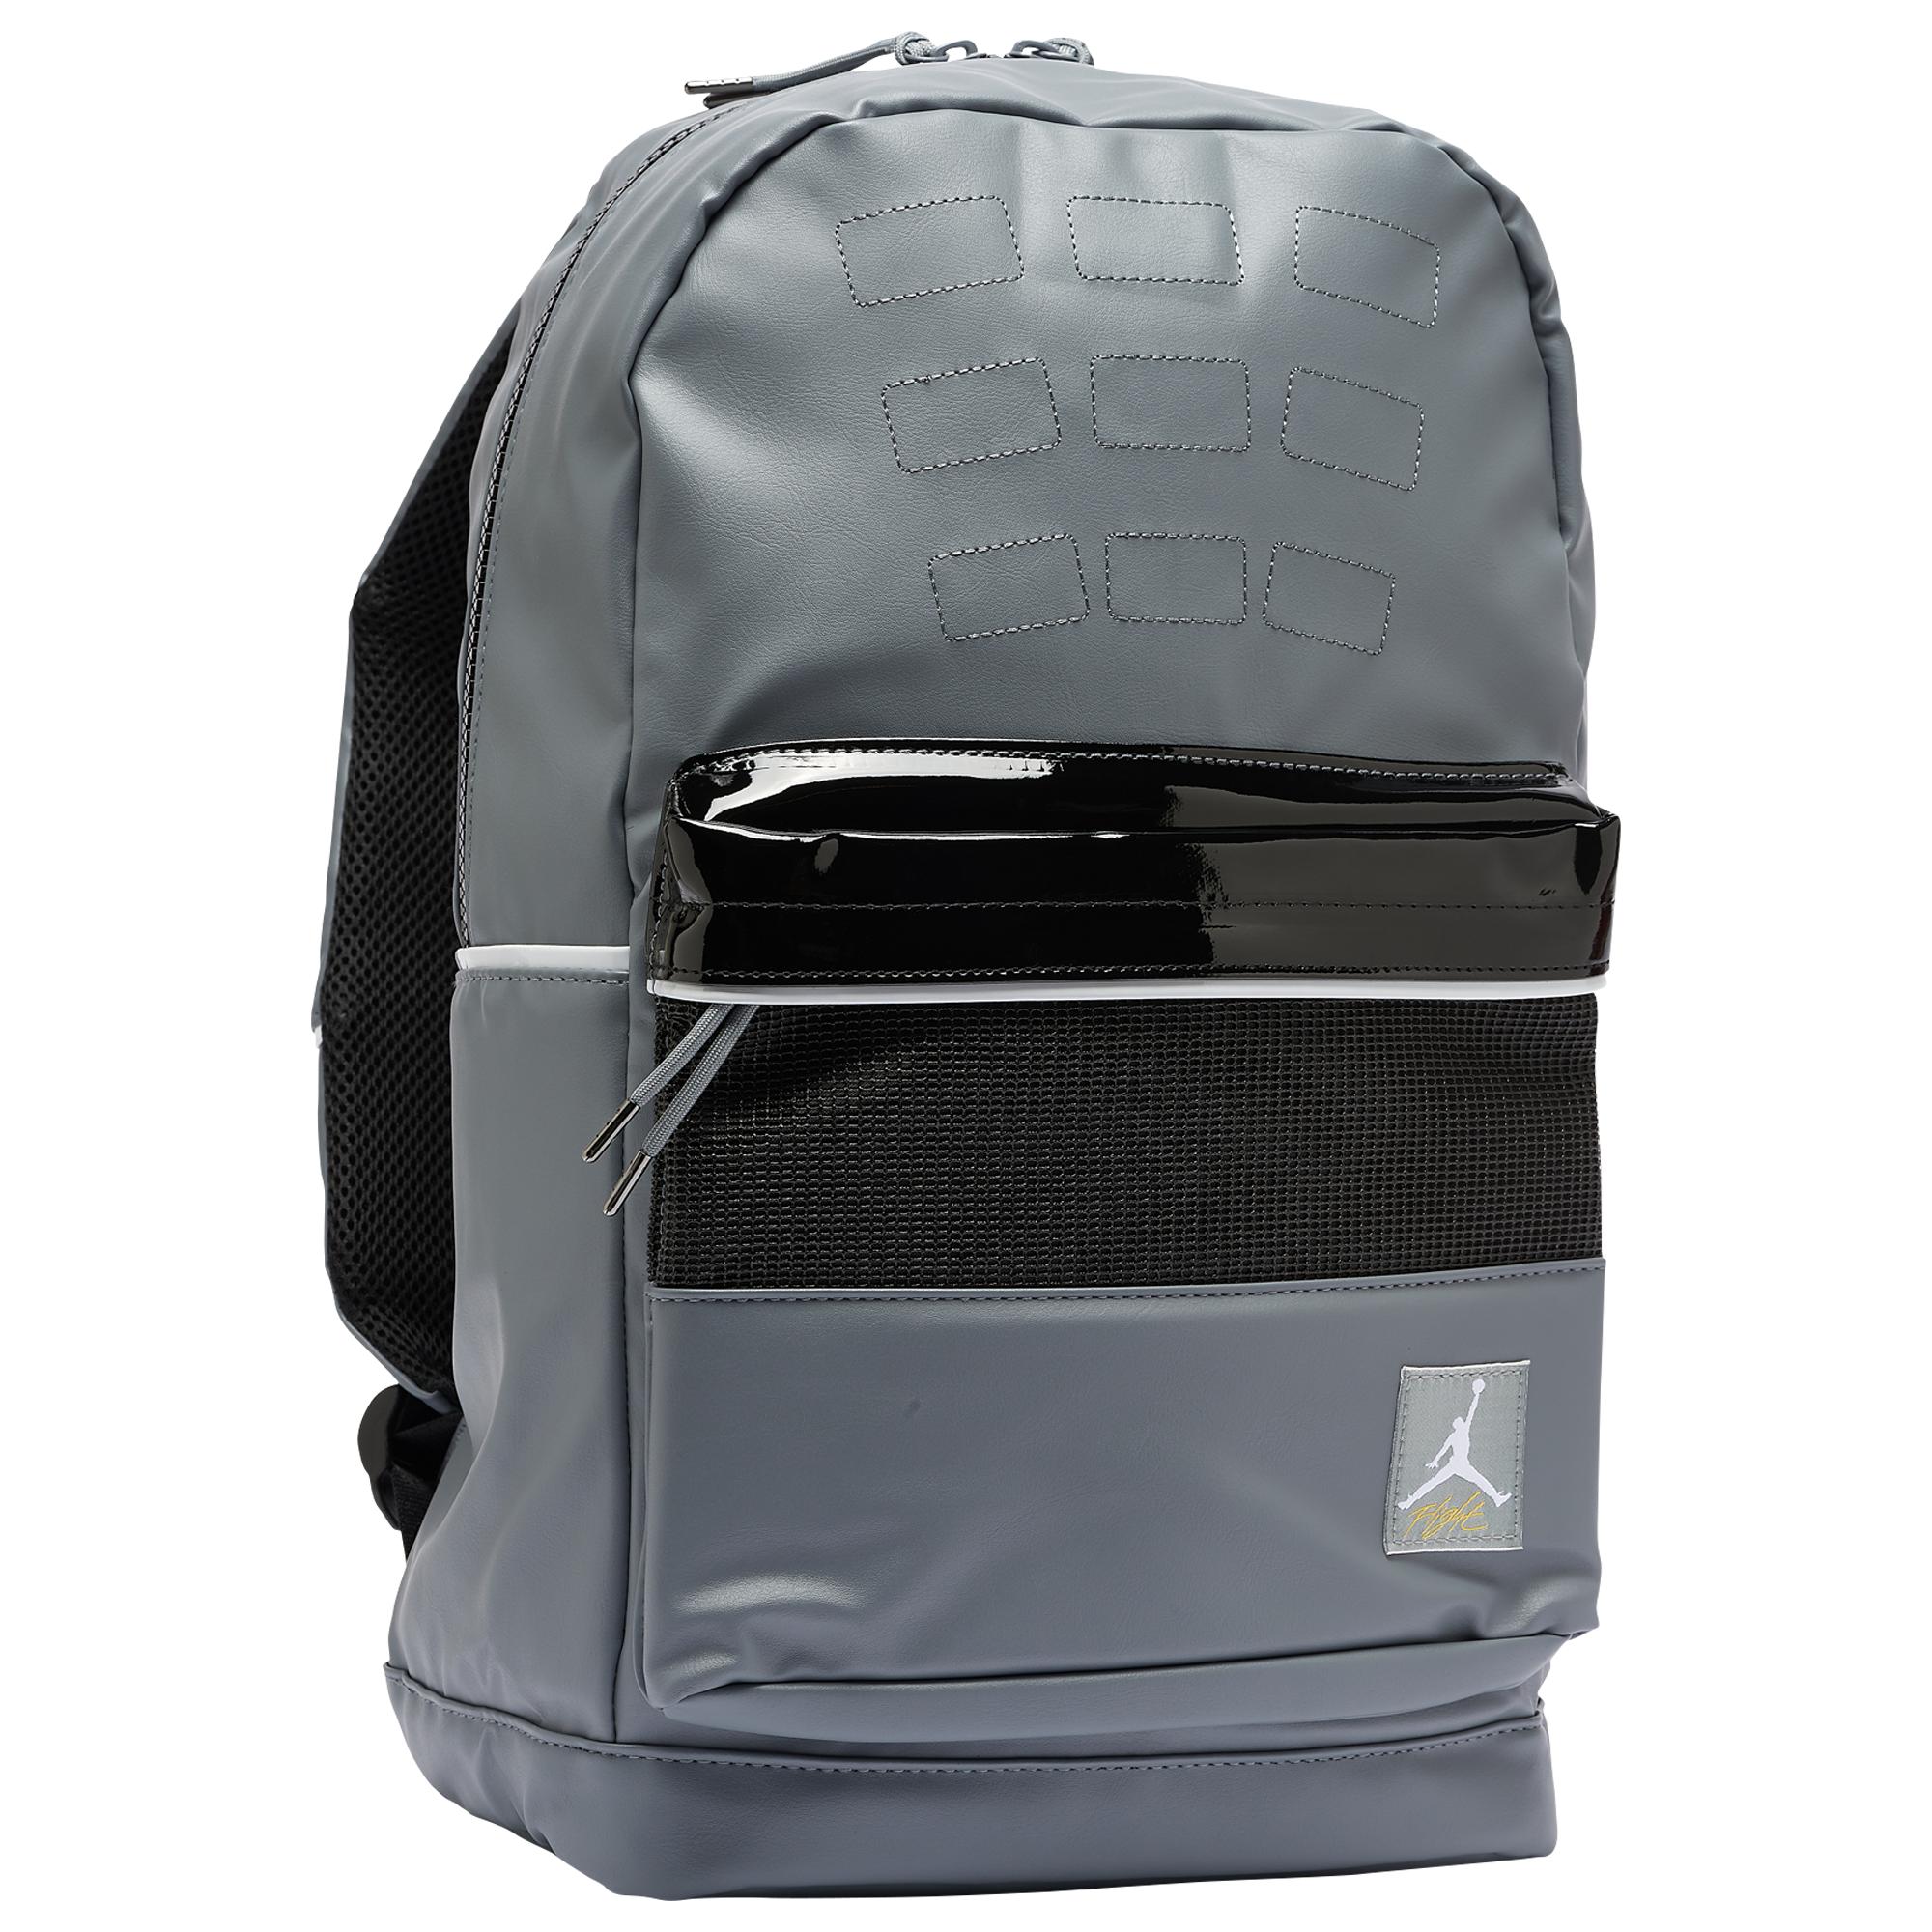 Nike Air Retro 4 Backpack in Gray for Men - Lyst